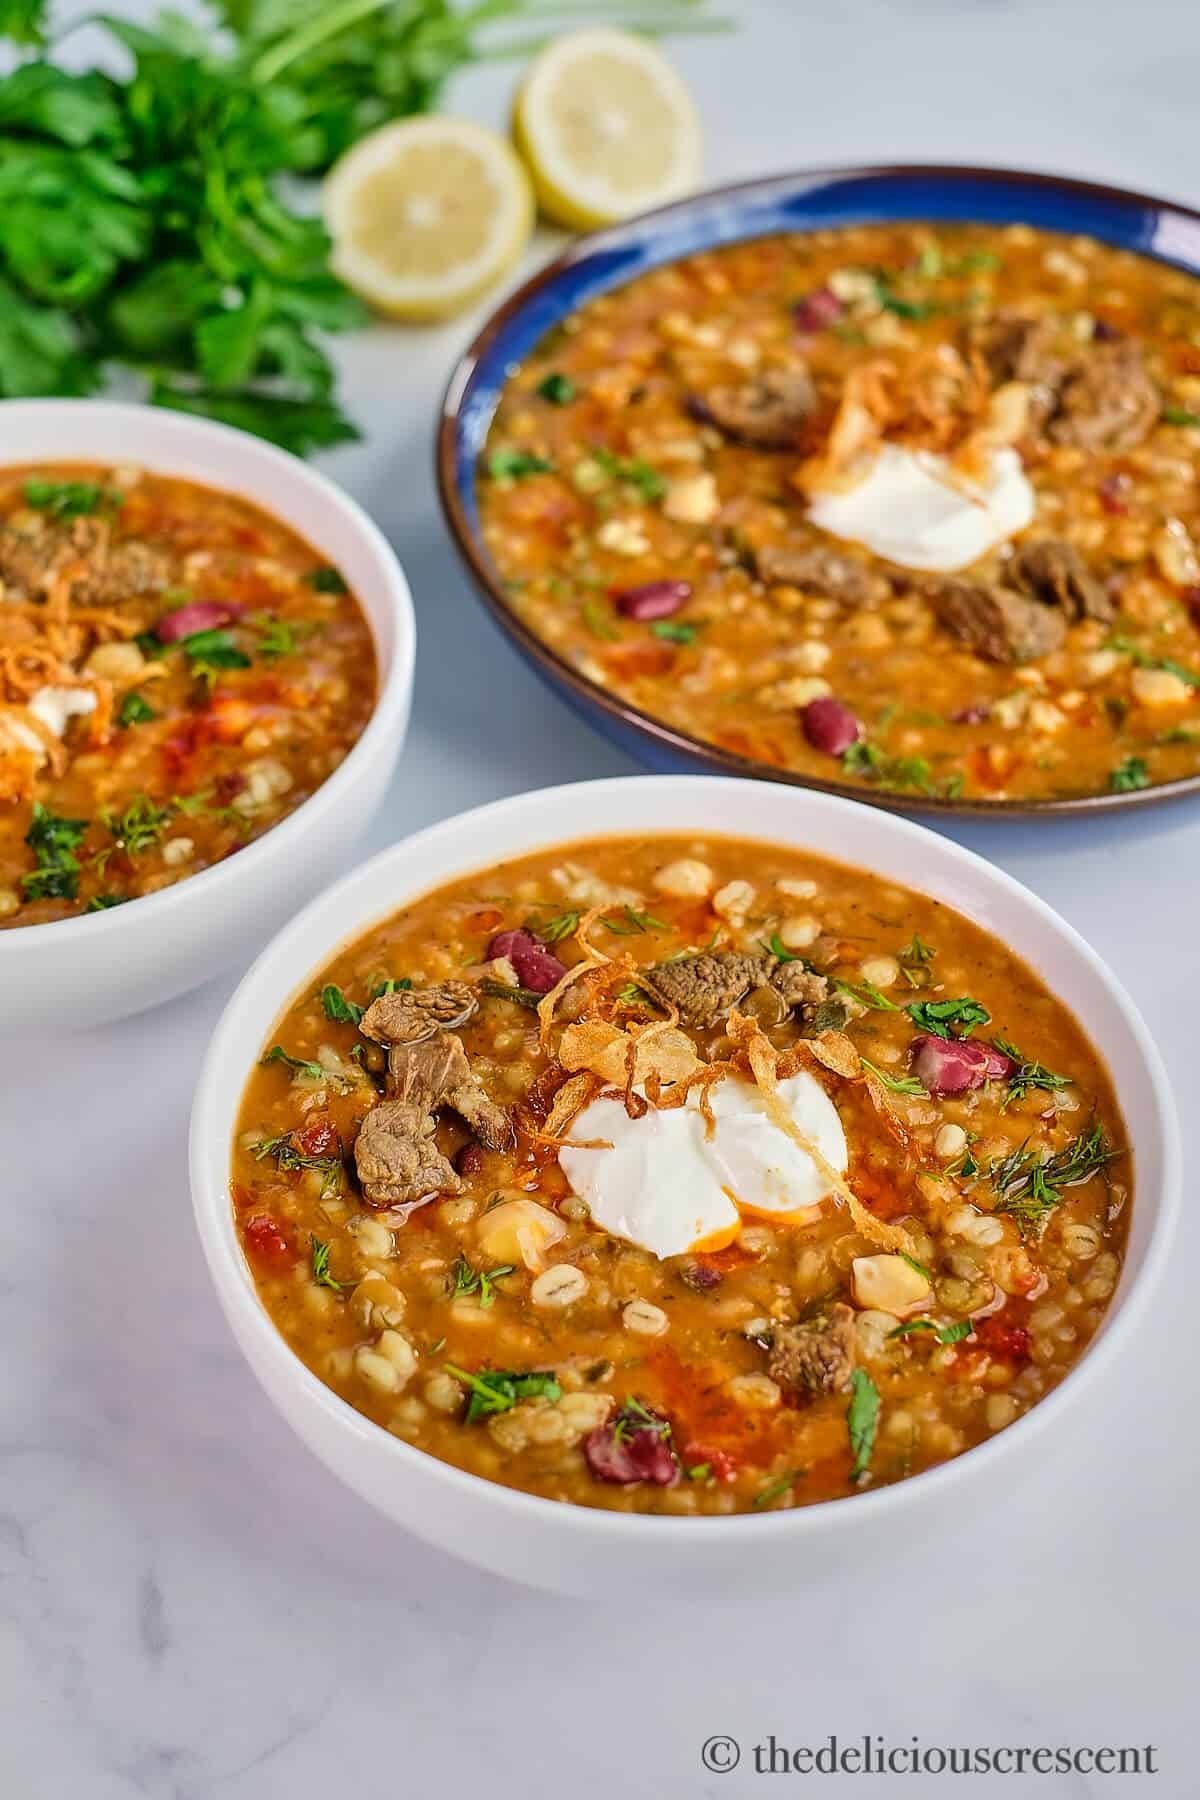 Beef and barley soup prepared in Persian style and served in bowls.